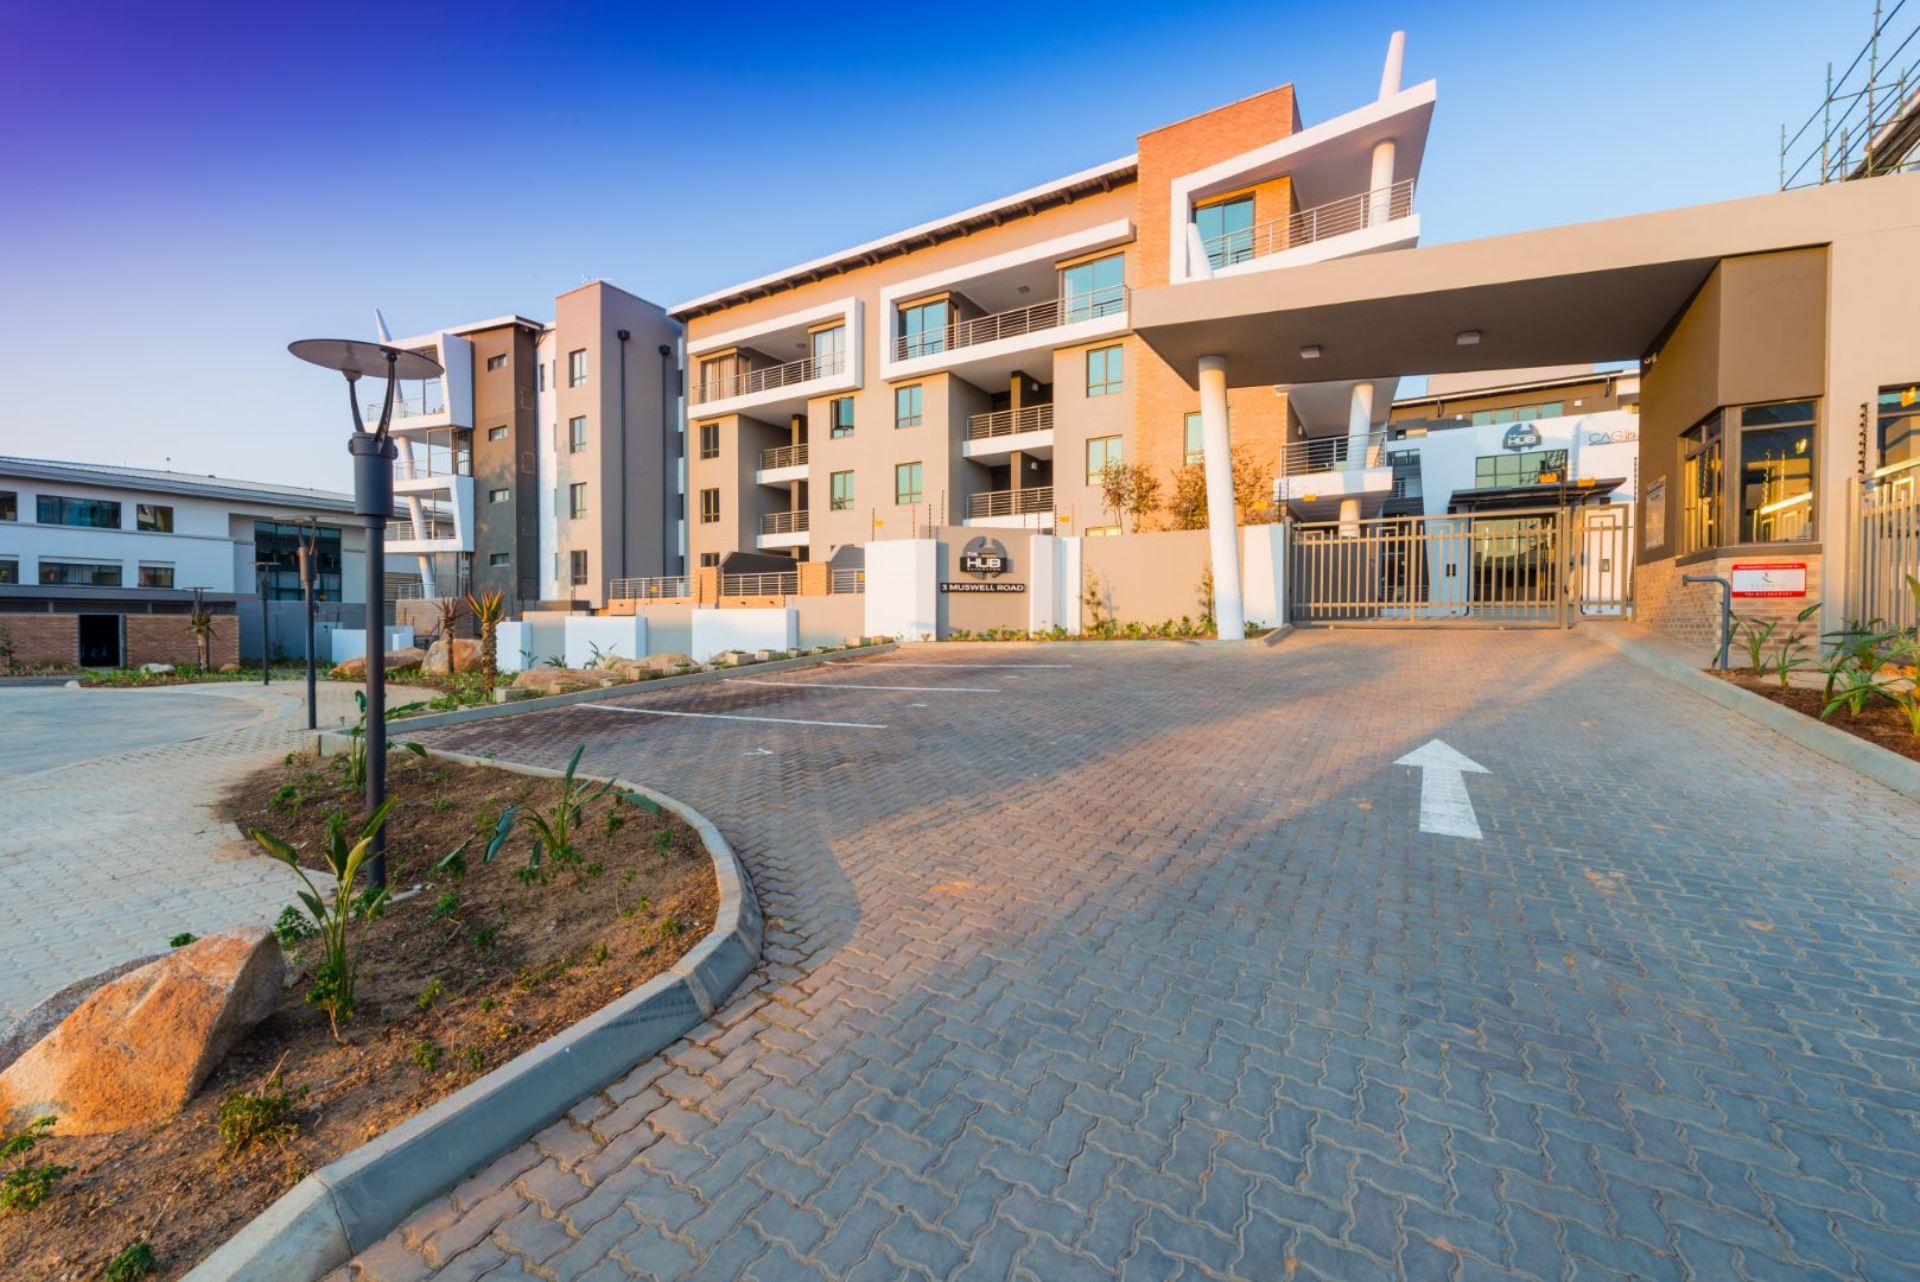 Latest Apartments To Rent In Sandton With Luxury Interior